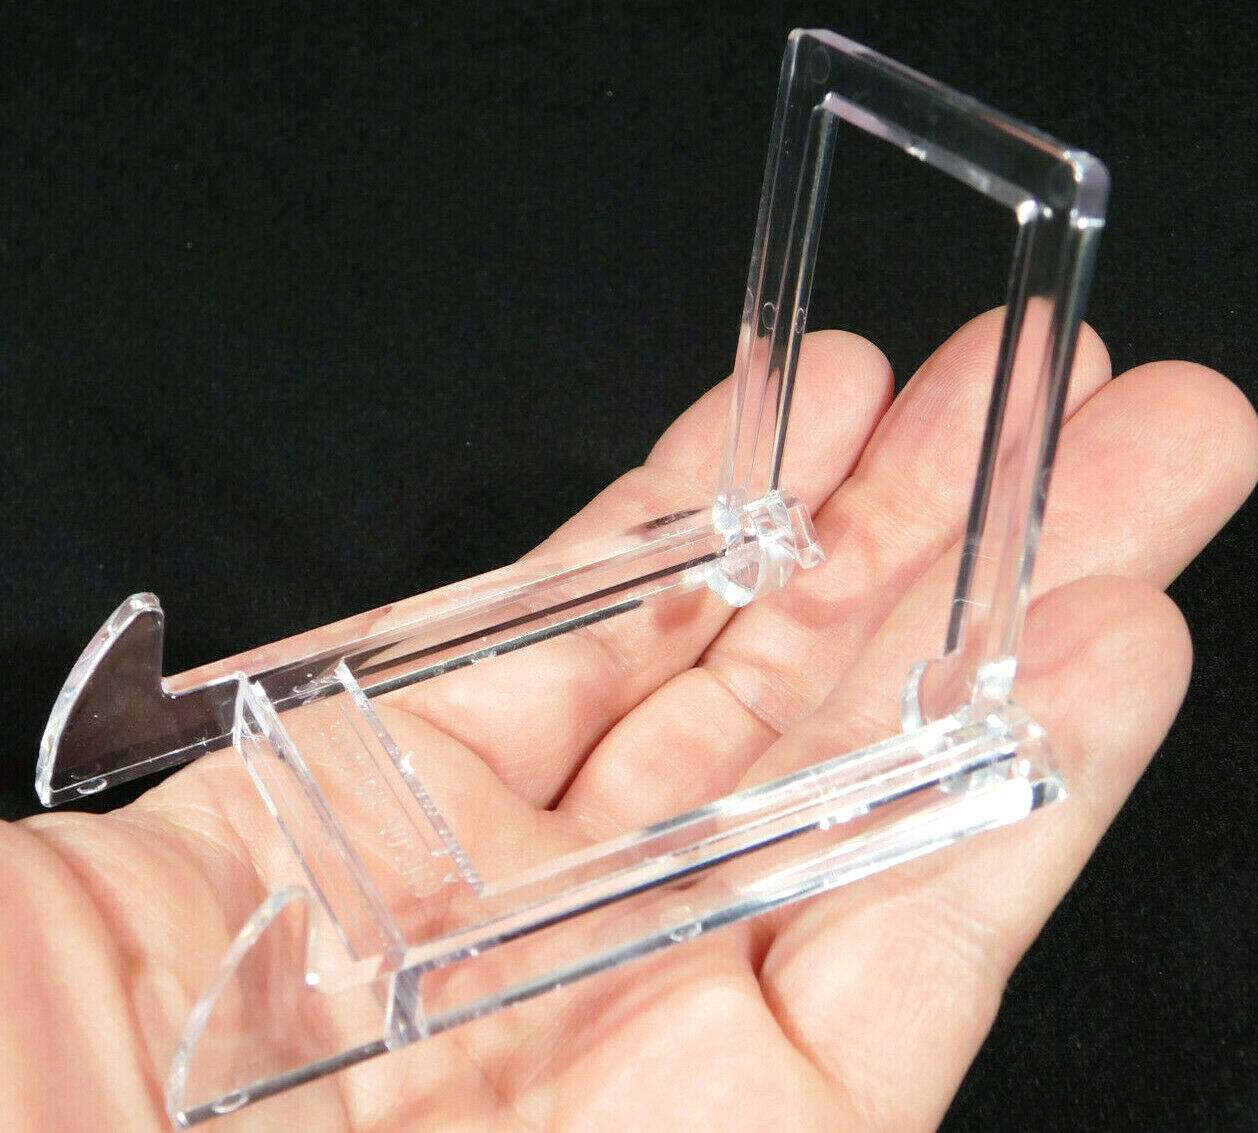 Easel Display Stand Small Size Adjustable Two Piece Clear Plastic